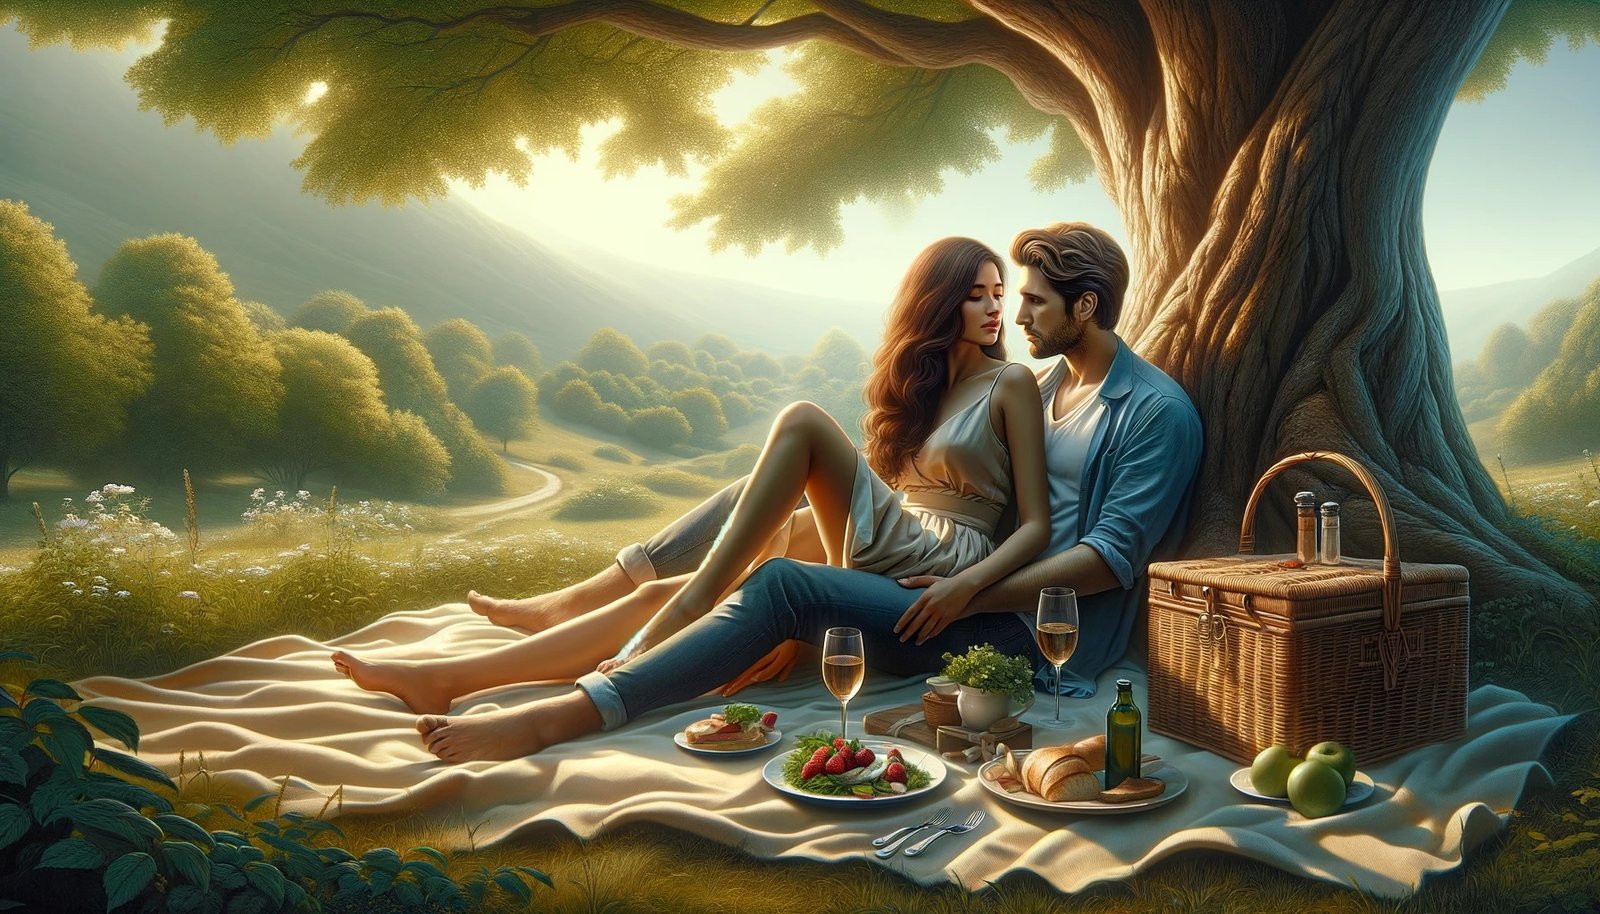 A man and woman sharing a romantic picnic lunch under the shade of a tree on a summer day.